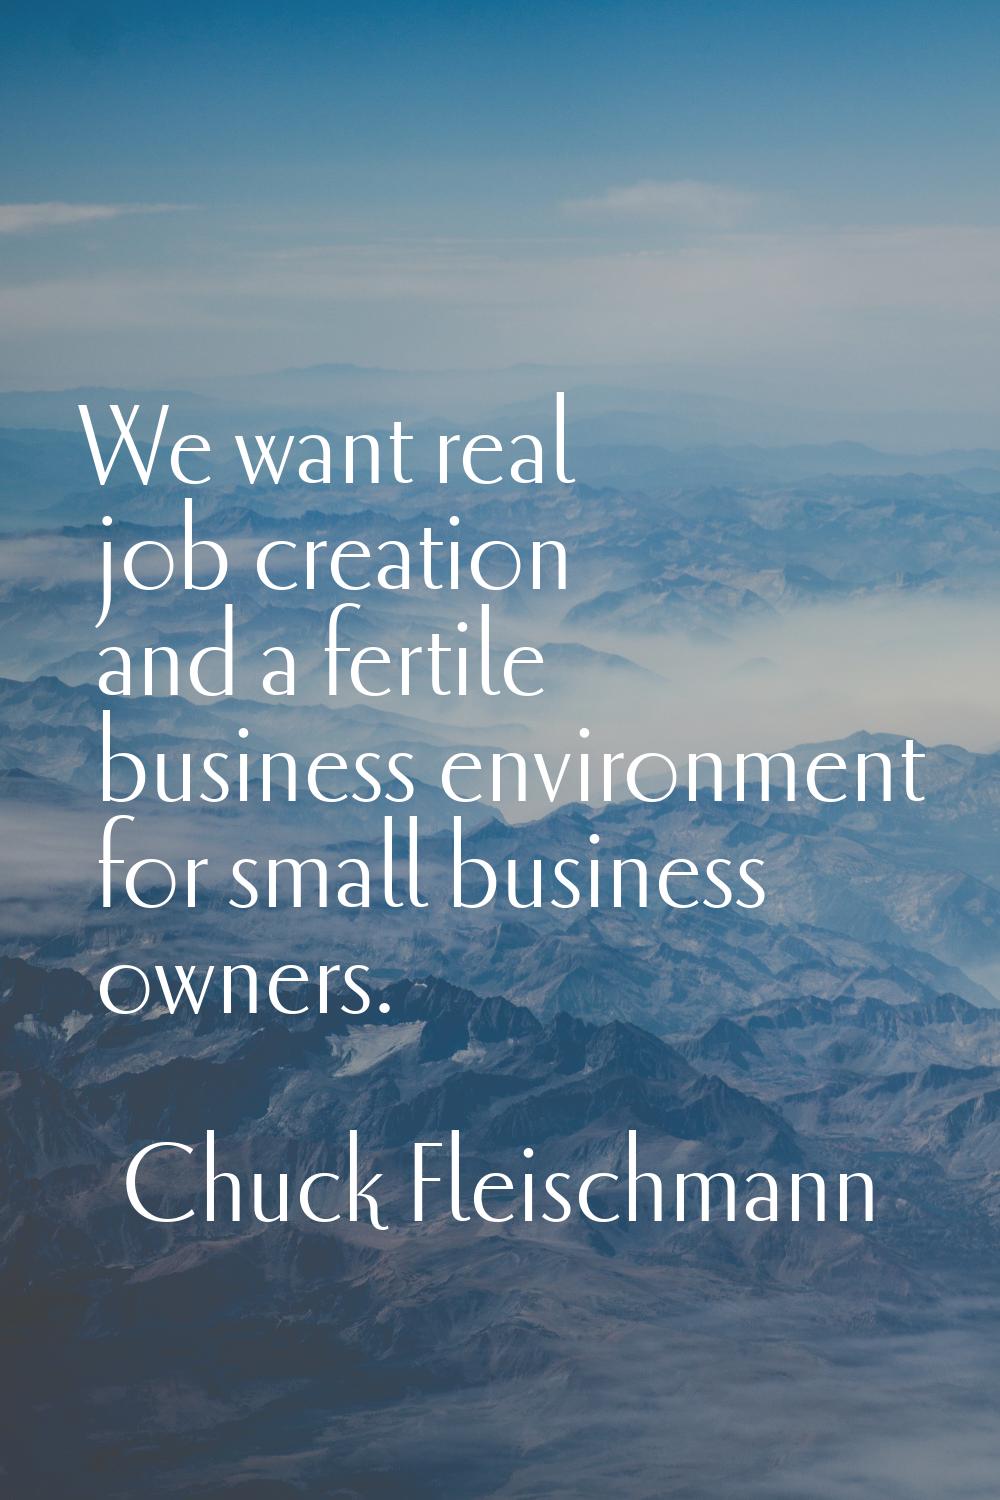 We want real job creation and a fertile business environment for small business owners.